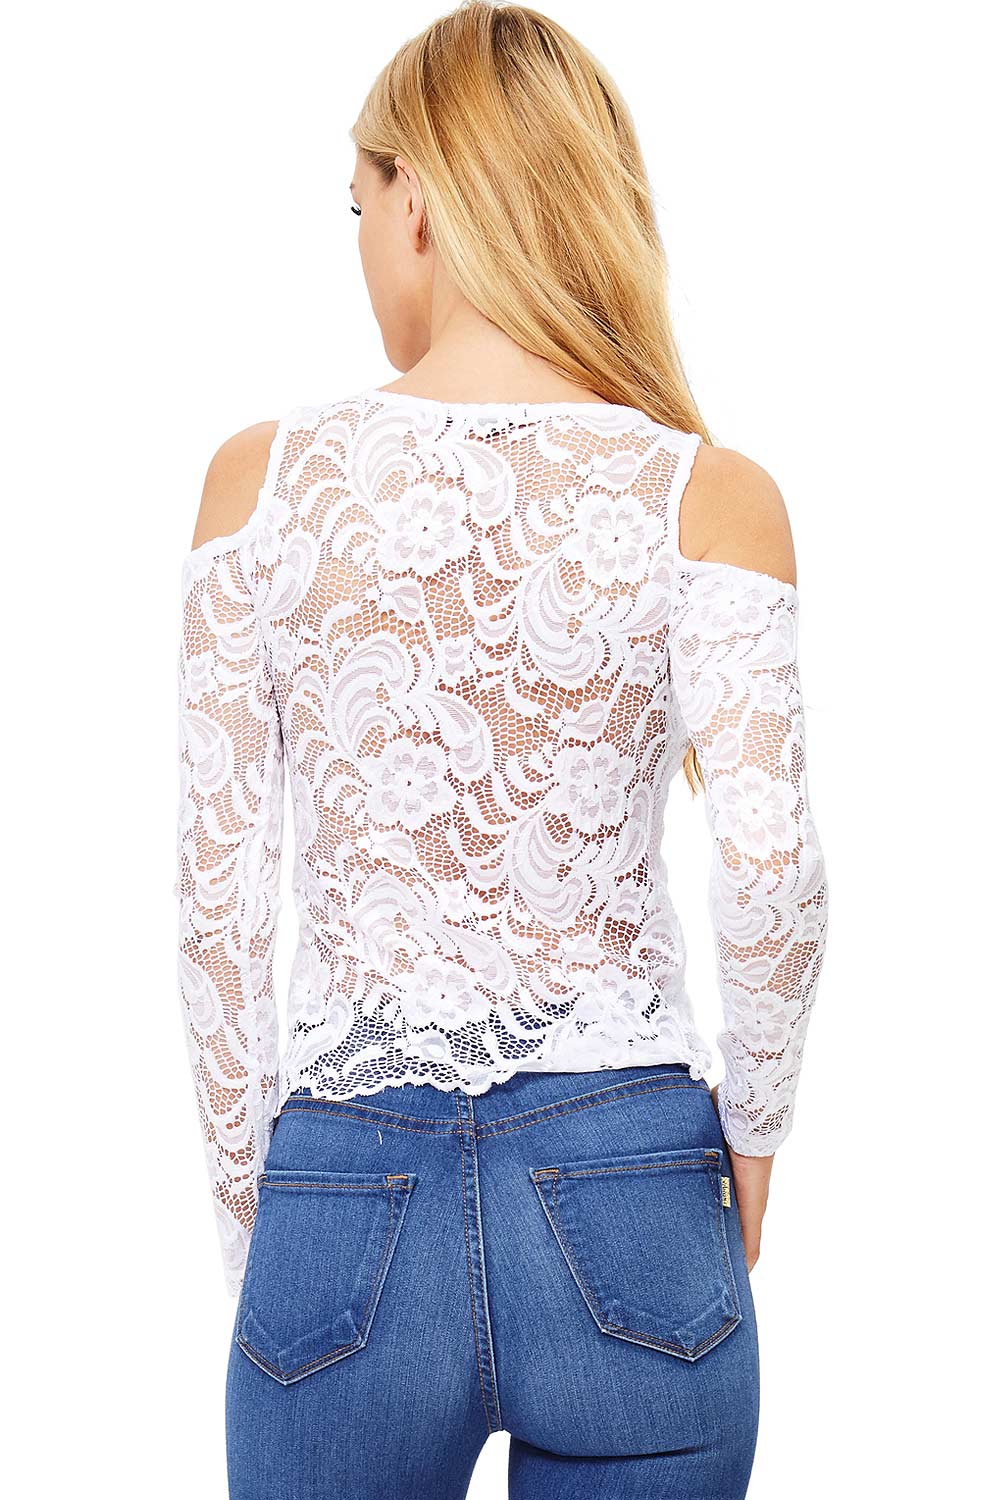 Lila Lace Top